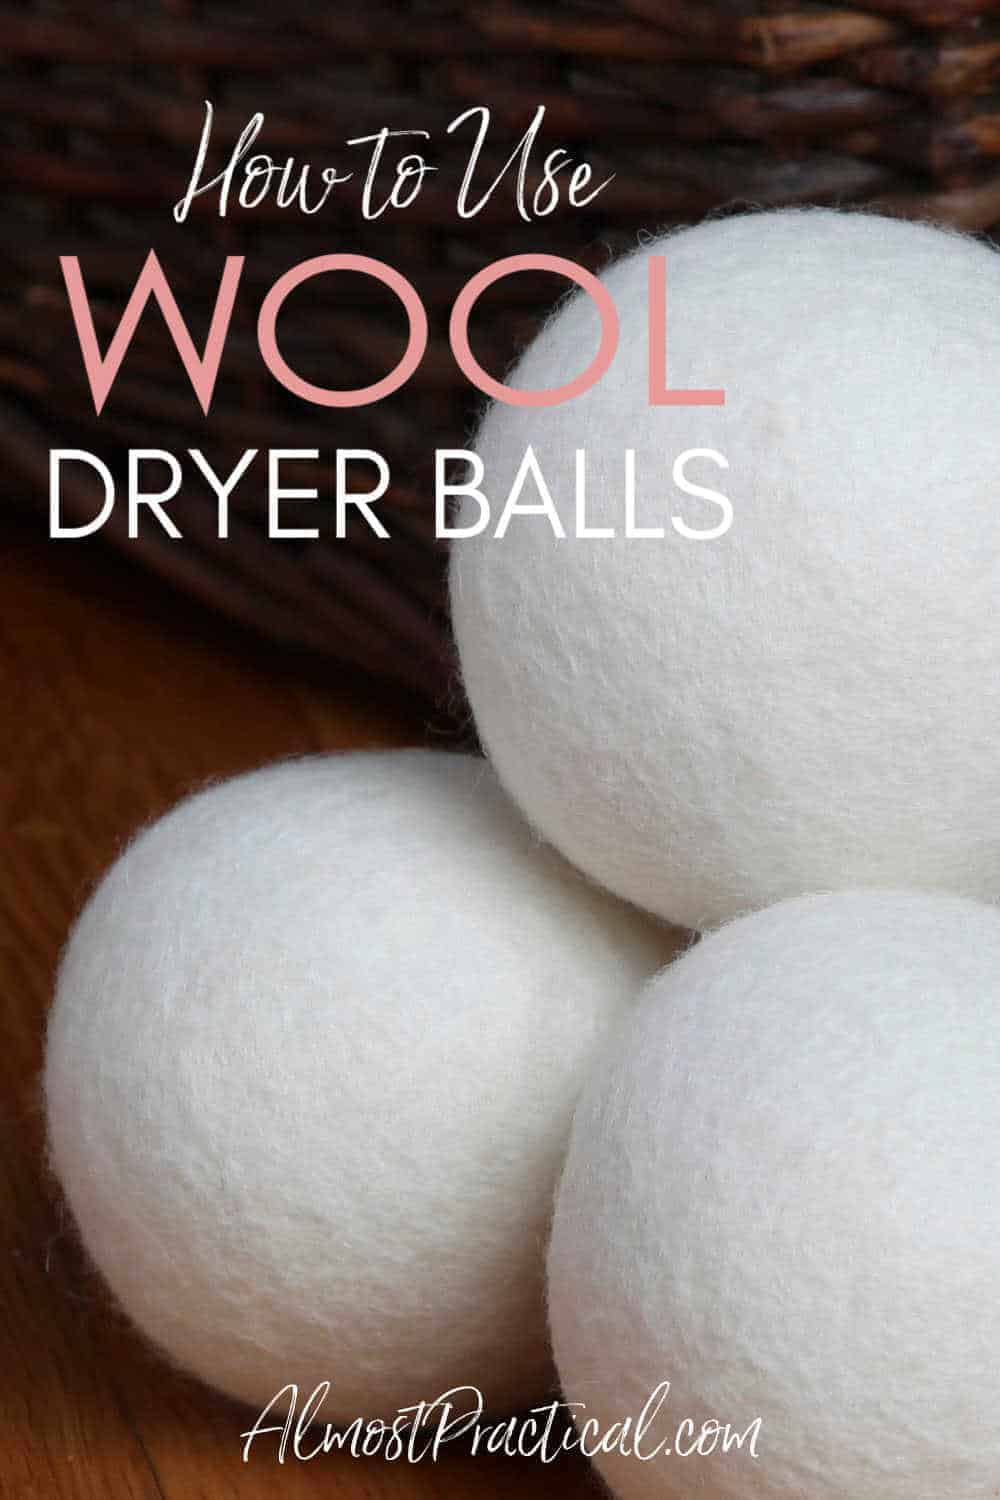 Will Essential Oils On Dryer Balls Stain My Clothes?